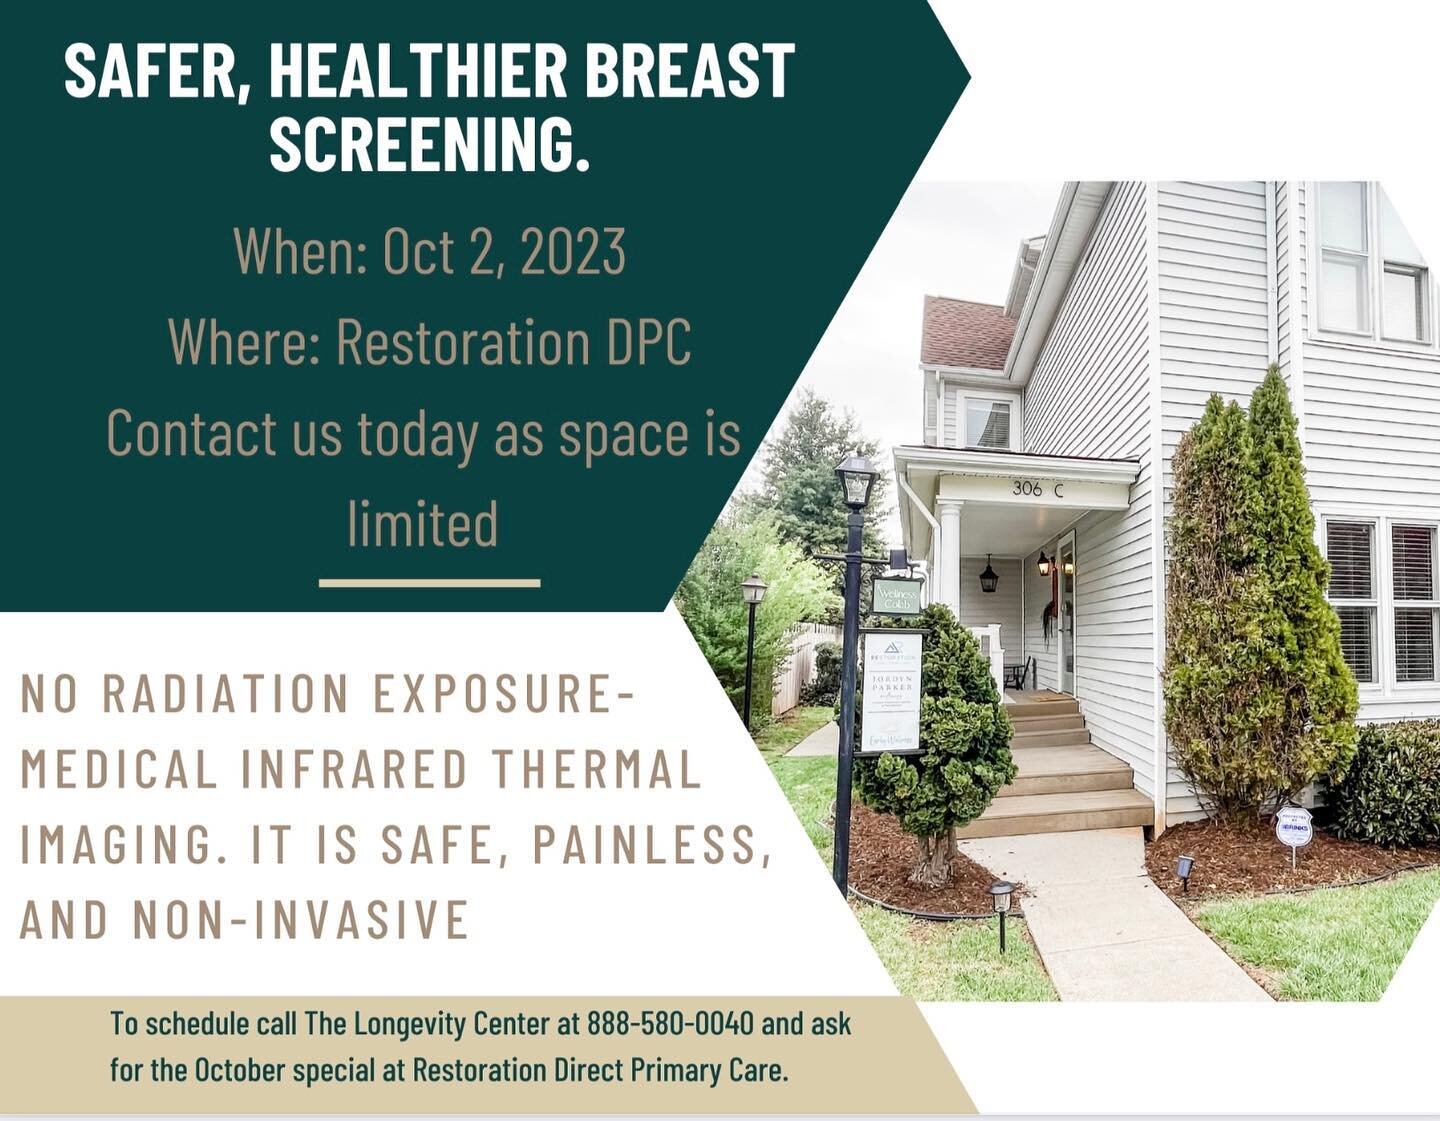 BIG NEWS!!!

Restoration Direct Primary Care has teamed up with The Longevity Center to bring you a safer, healthier breast screening! 

The Longevity Thermography Center is coming to Restoration DPC on October 2nd and there will be limited appointme